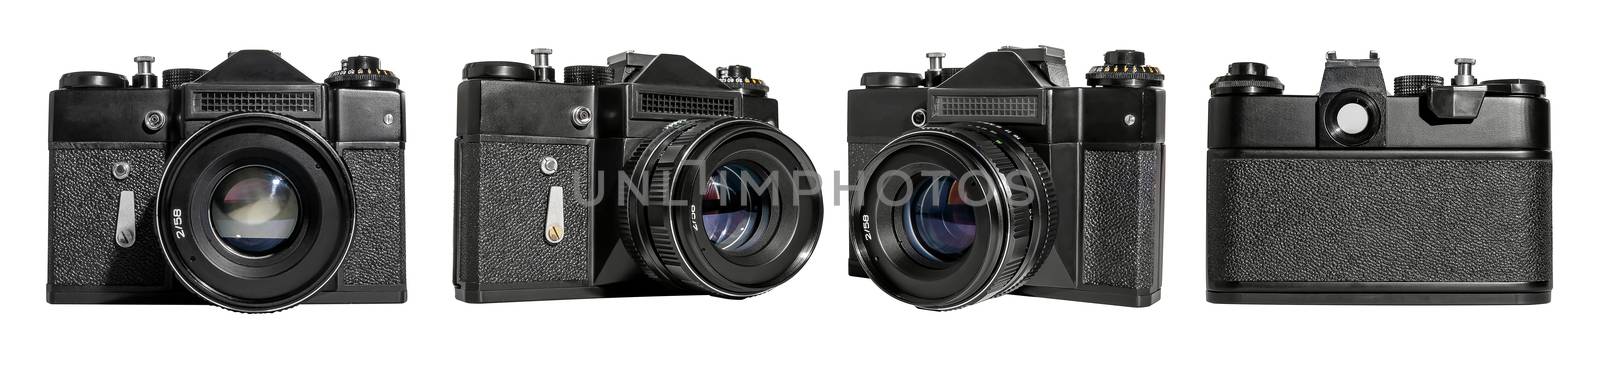 Retro camera isolated on white background three things in a row vintage antiquity  analogue